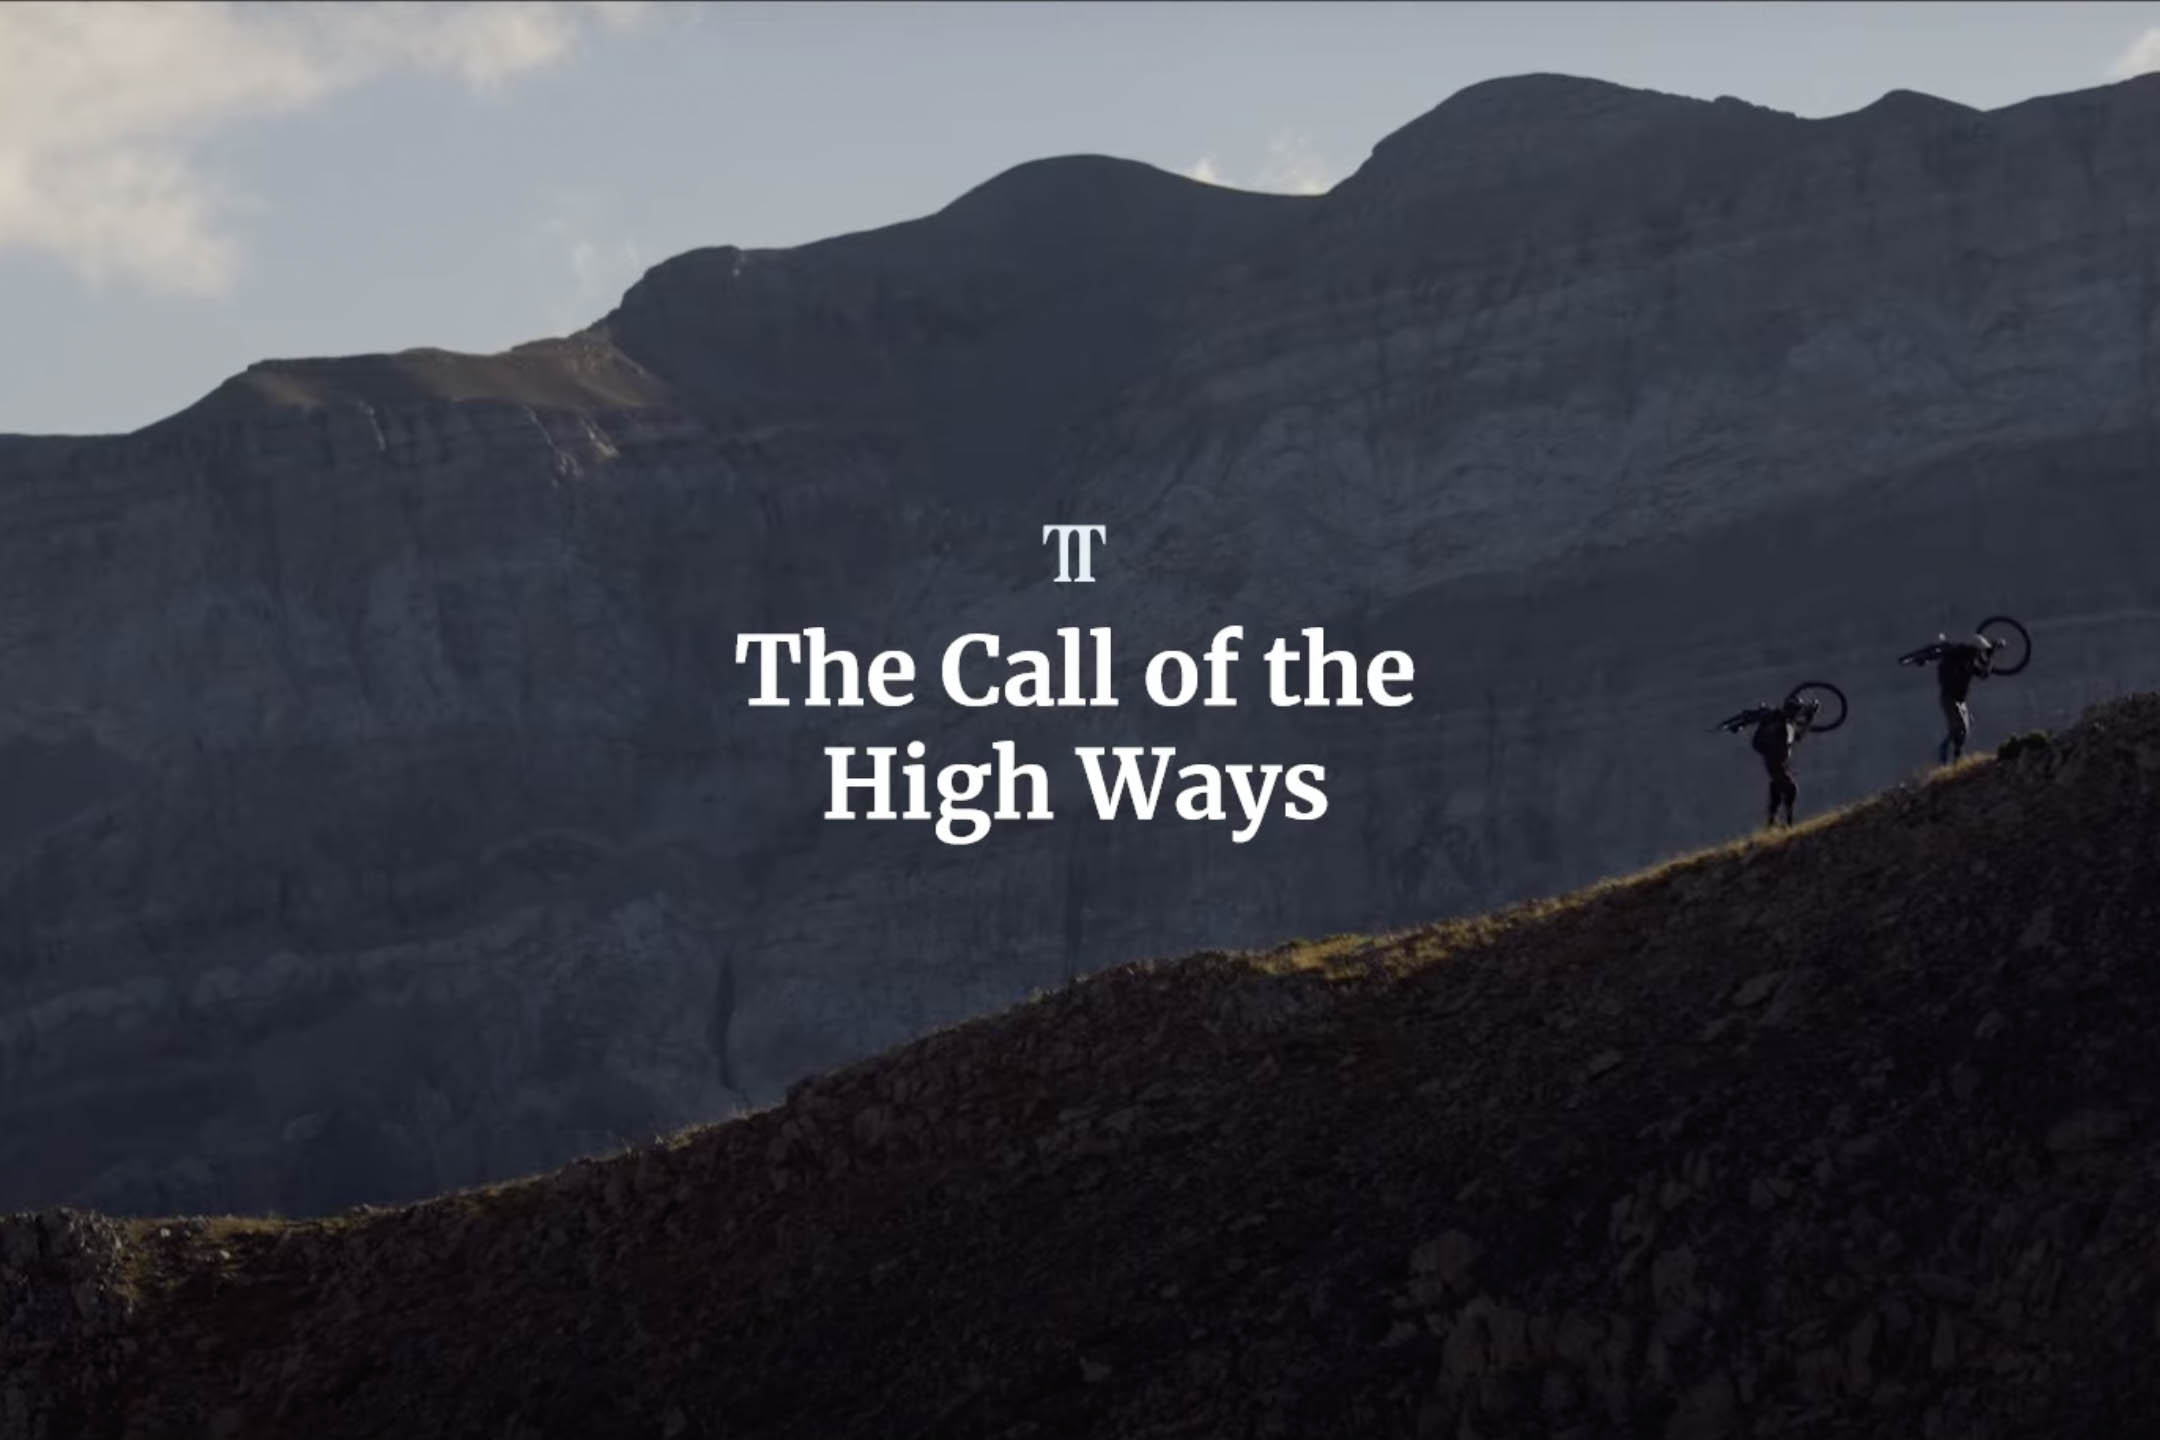 The Call of the High Ways